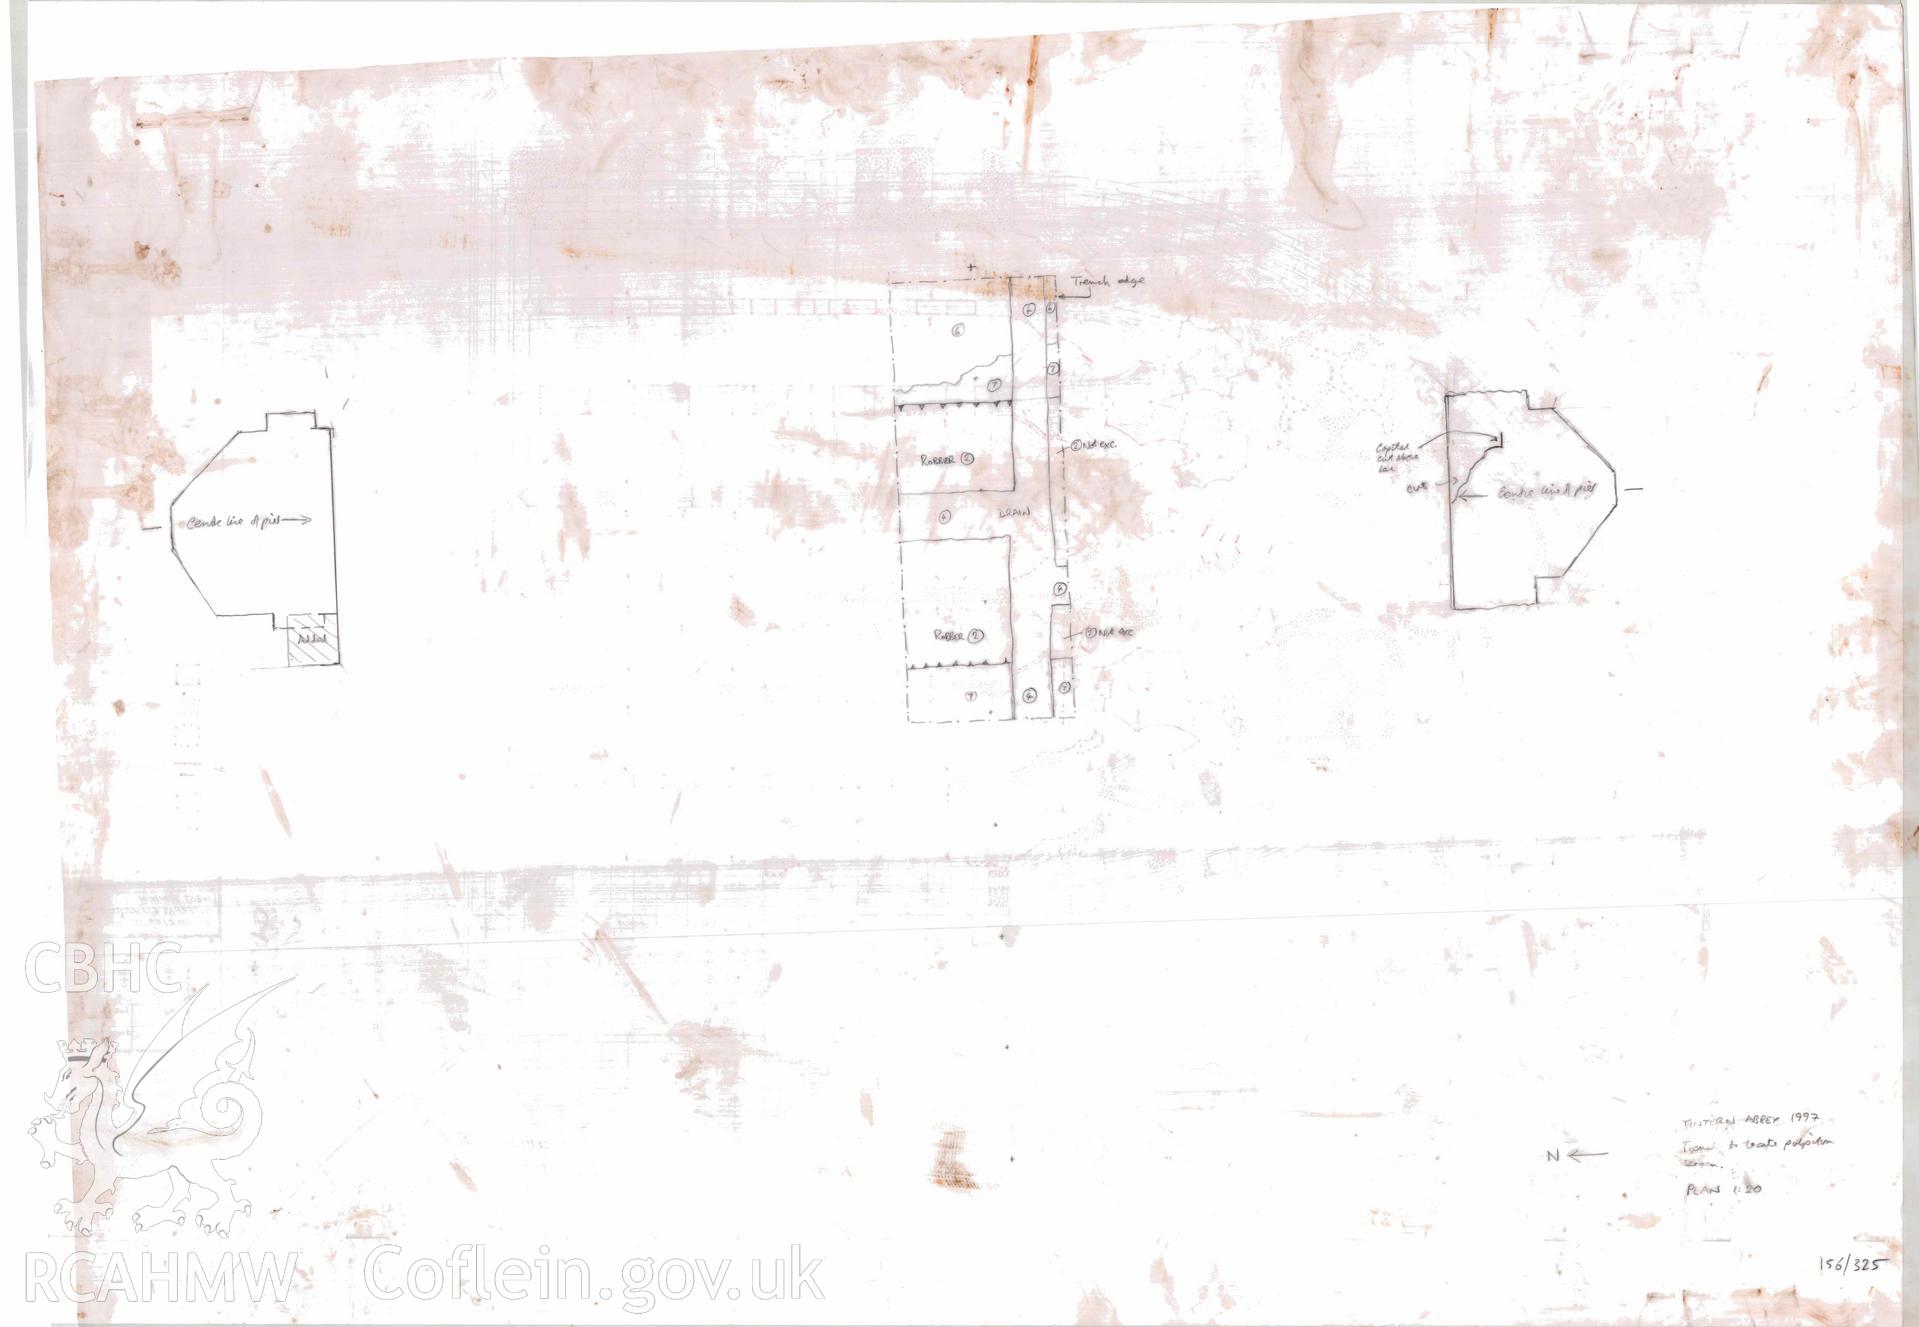 Cadw guardianship monument drawing, sketch of location of excavation trench and site of pulpitum screen, Tintern Abbey.  Dated 1997.